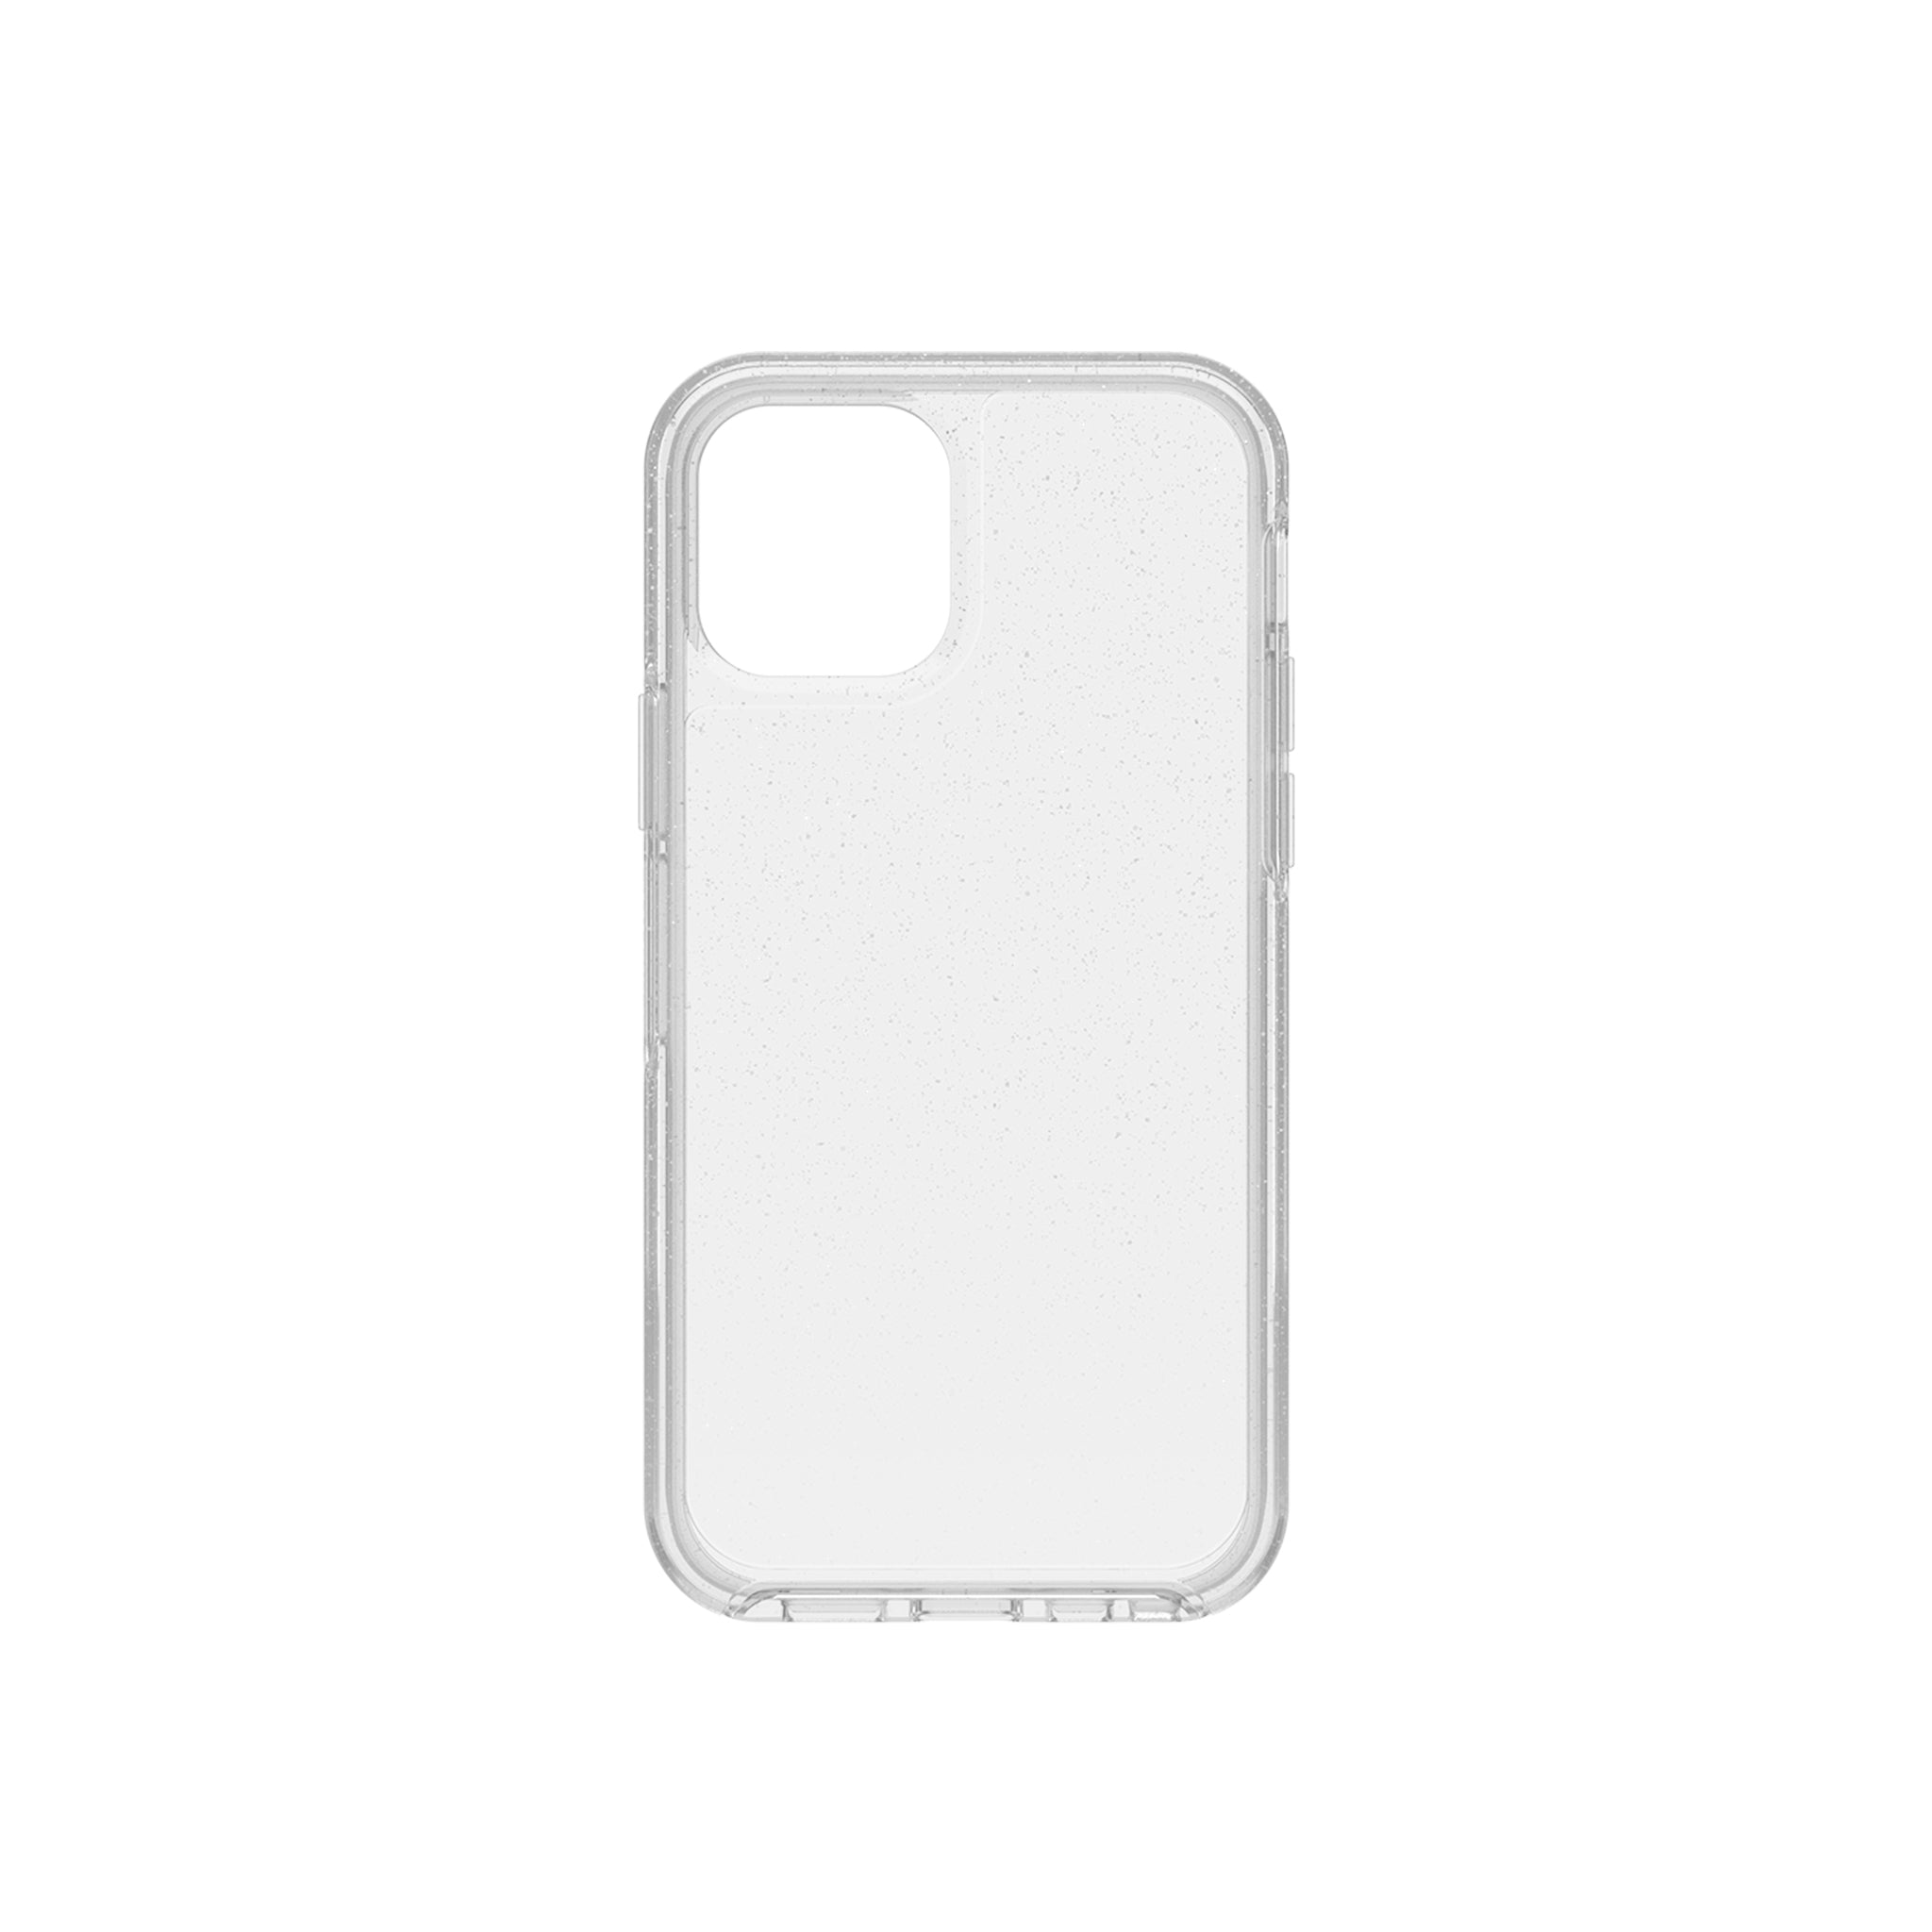 OtterBox - Symmetry Clear for iPhone 12 / 12 Pro - Starducts 2.0